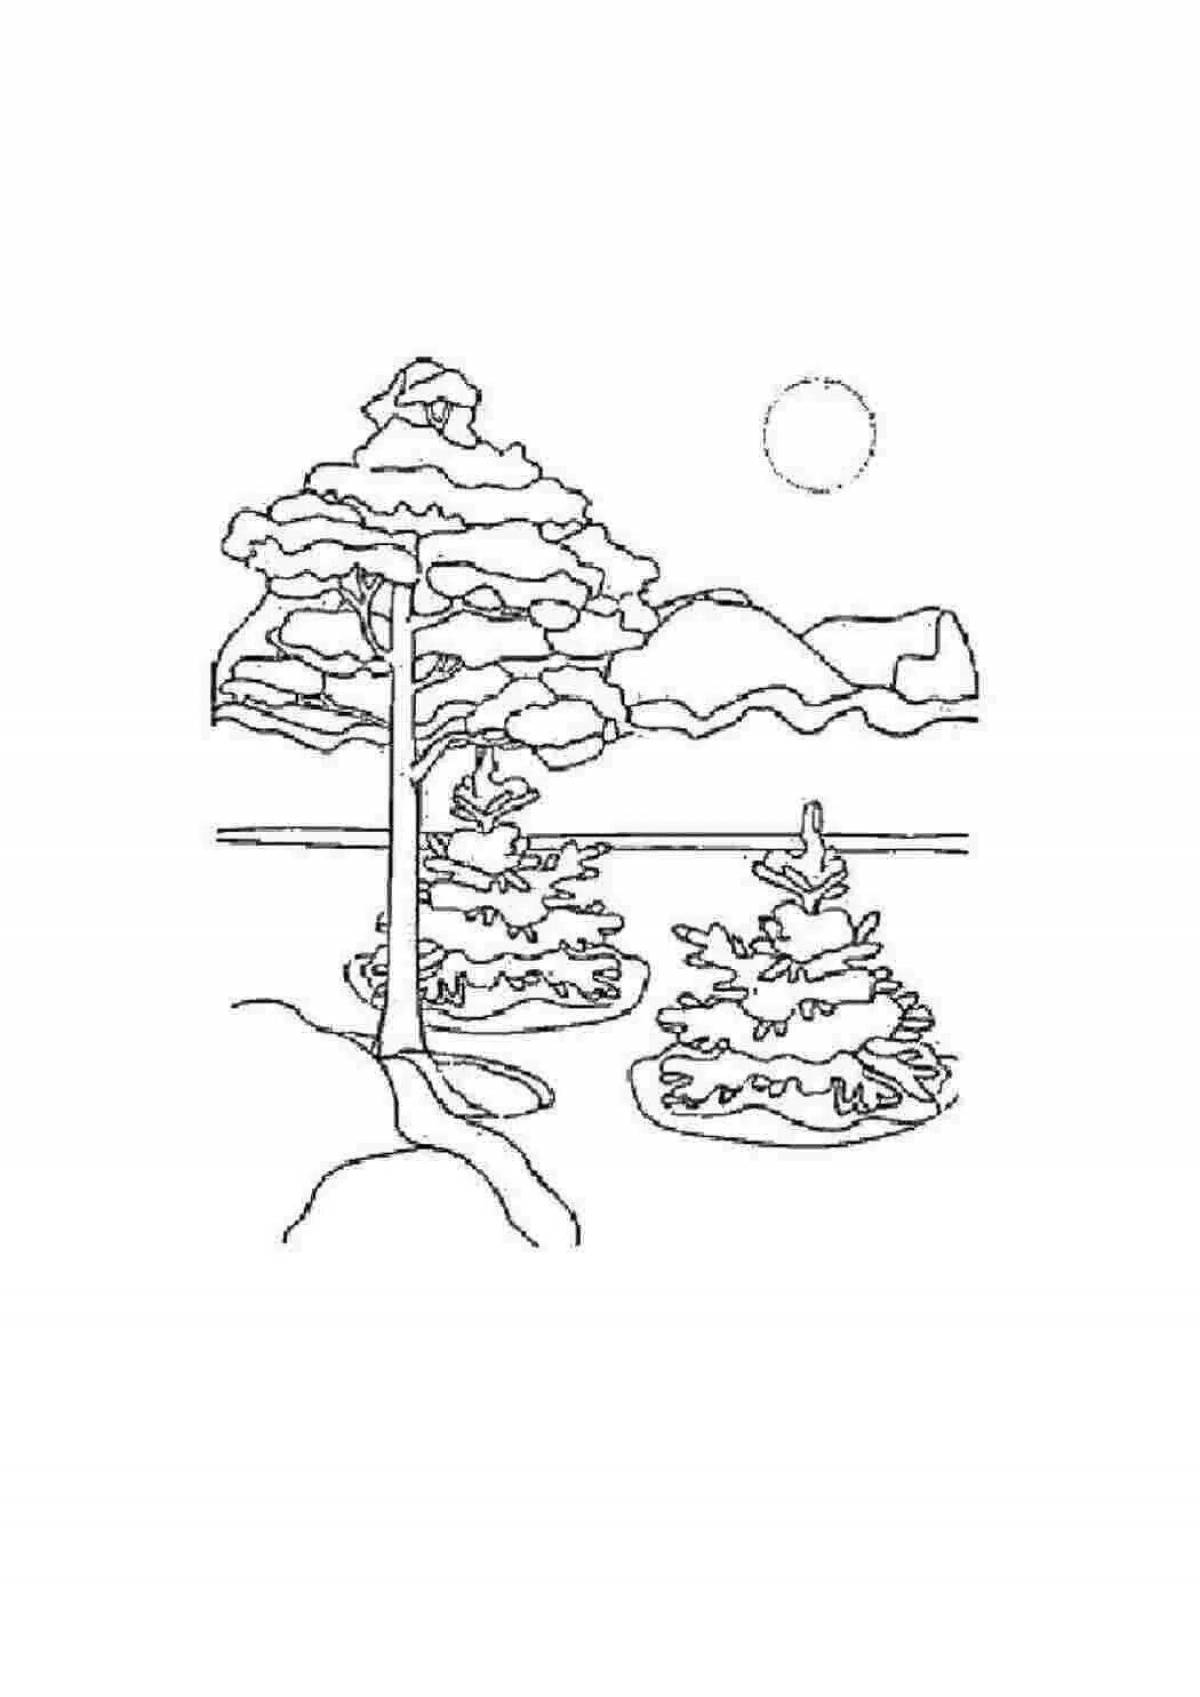 Live winter plants coloring page for kids